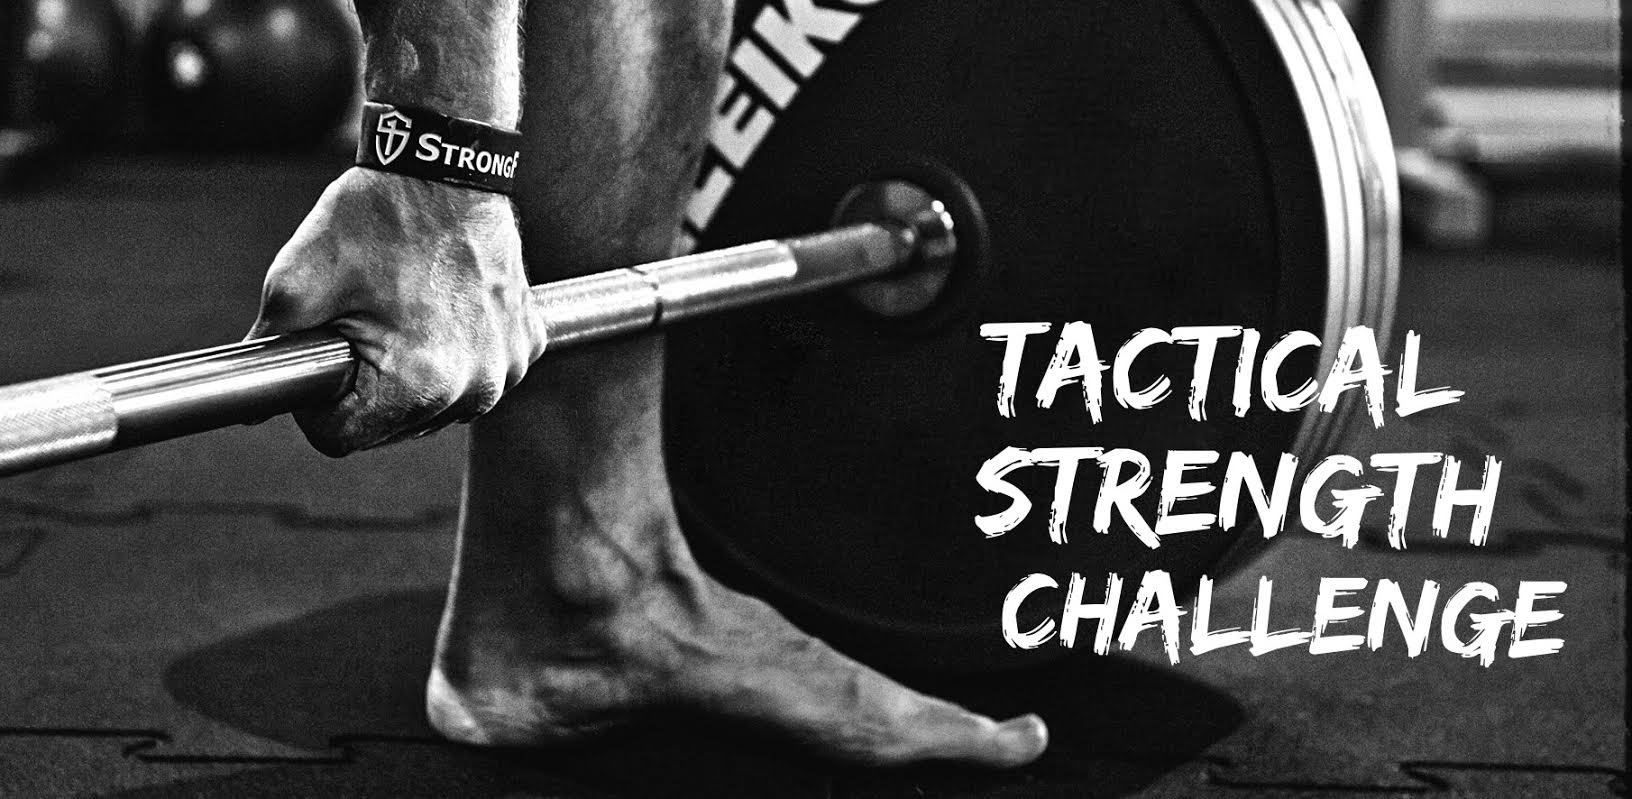 Strong first. Strong strength. Barbell snatches. Barbell Challenge. Give me strength обои на телефон.